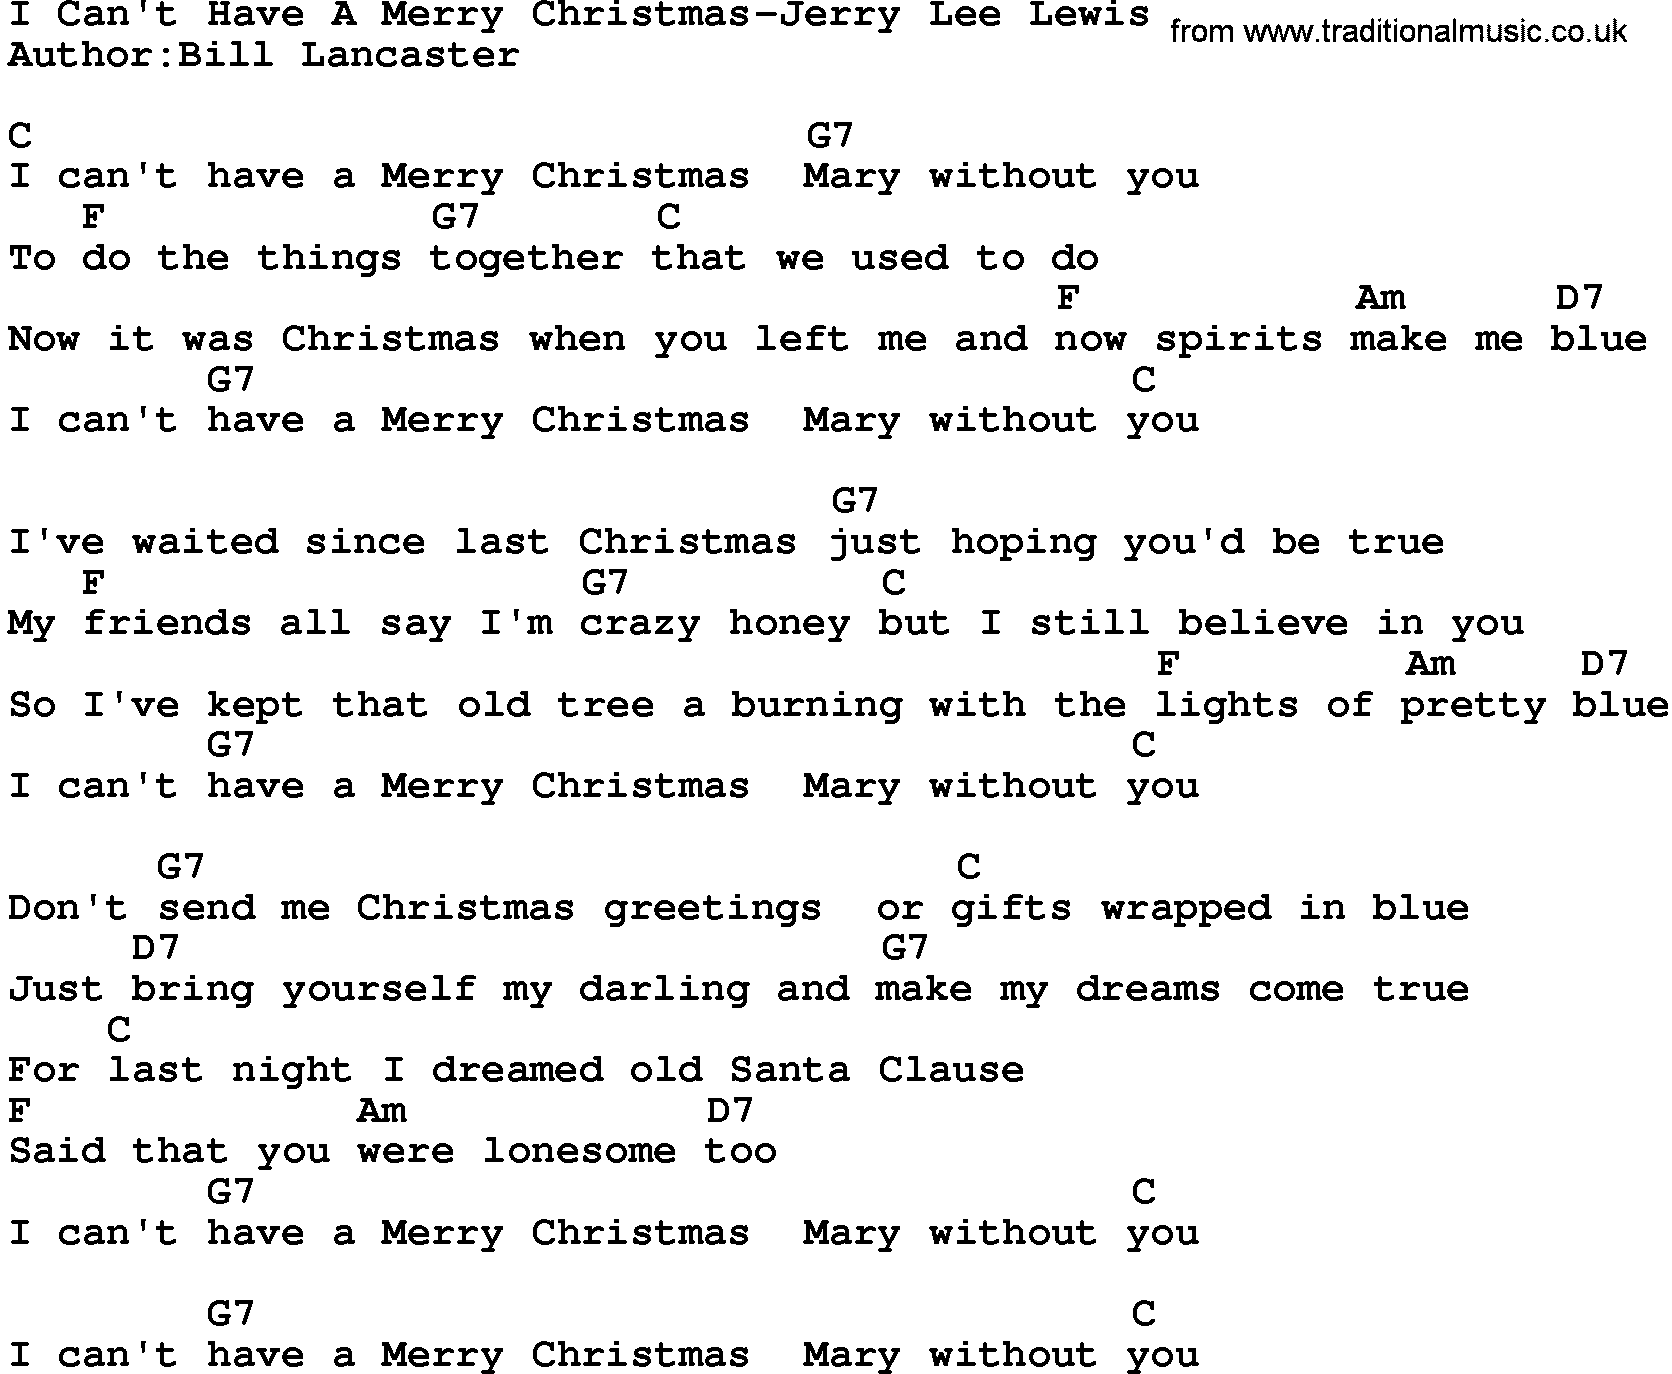 Country music song: I Can't Have A Merry Christmas-Jerry Lee Lewis lyrics and chords